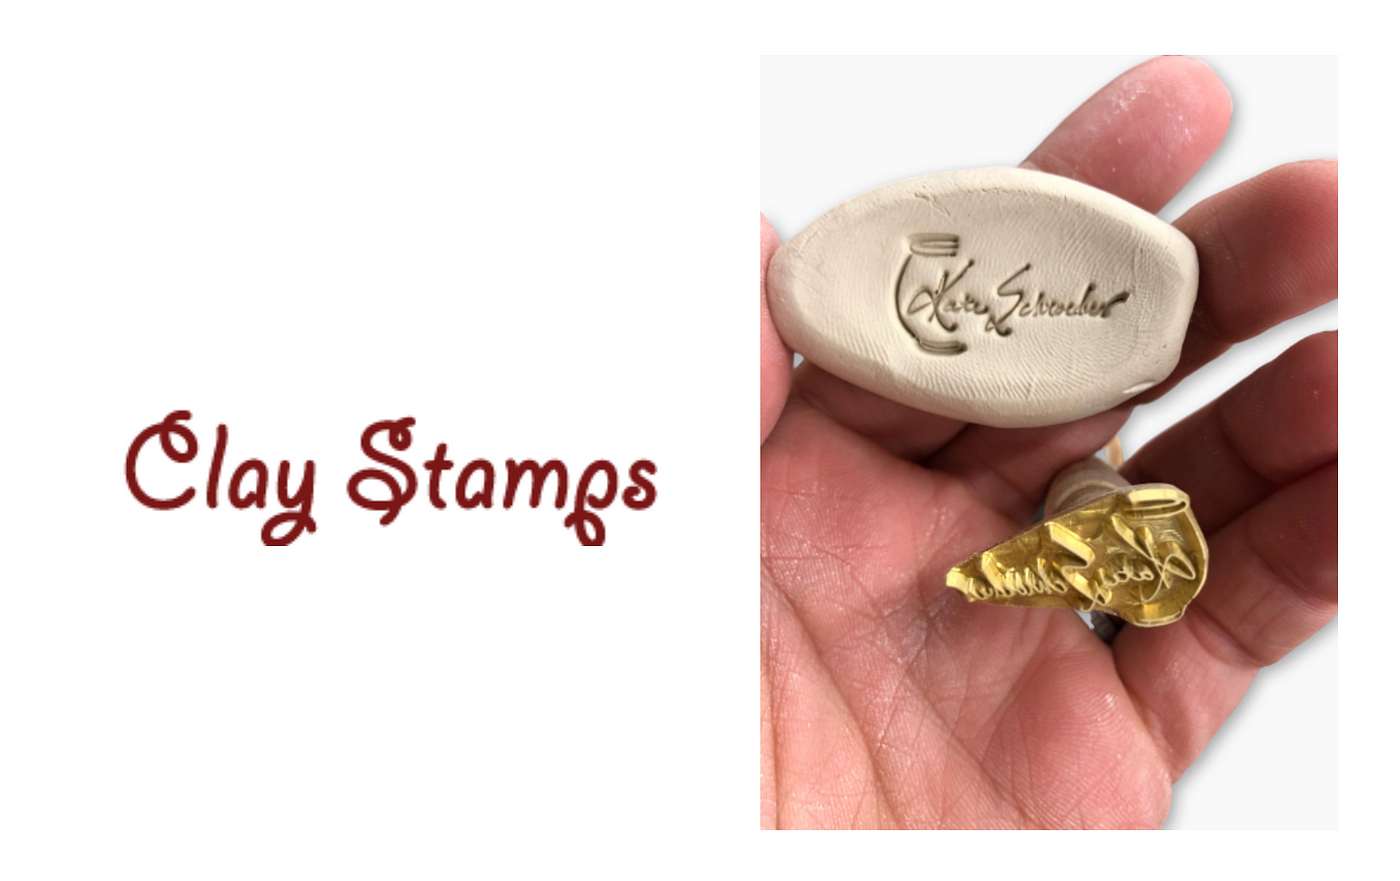 A Custom Engraved Metal (Brass) 1/2 Clay Stamp - Claystamps